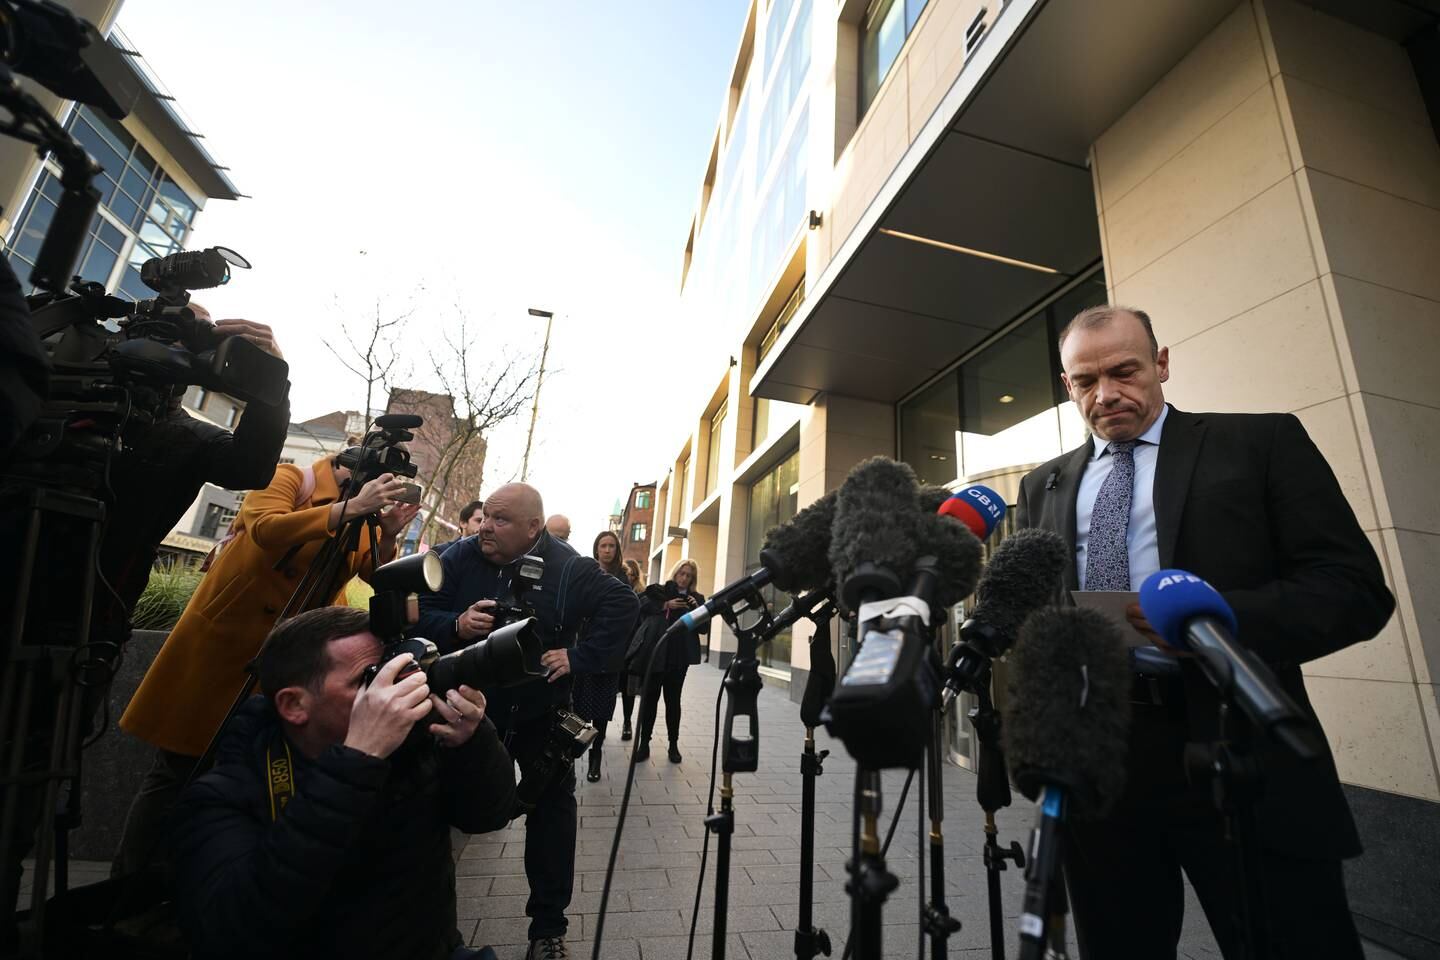 The Northern Ireland Secretary of State Chris Heaton-Harris gives a statement regarding his decision to call an election, on October 28, in Belfast, Northern Ireland. Getty